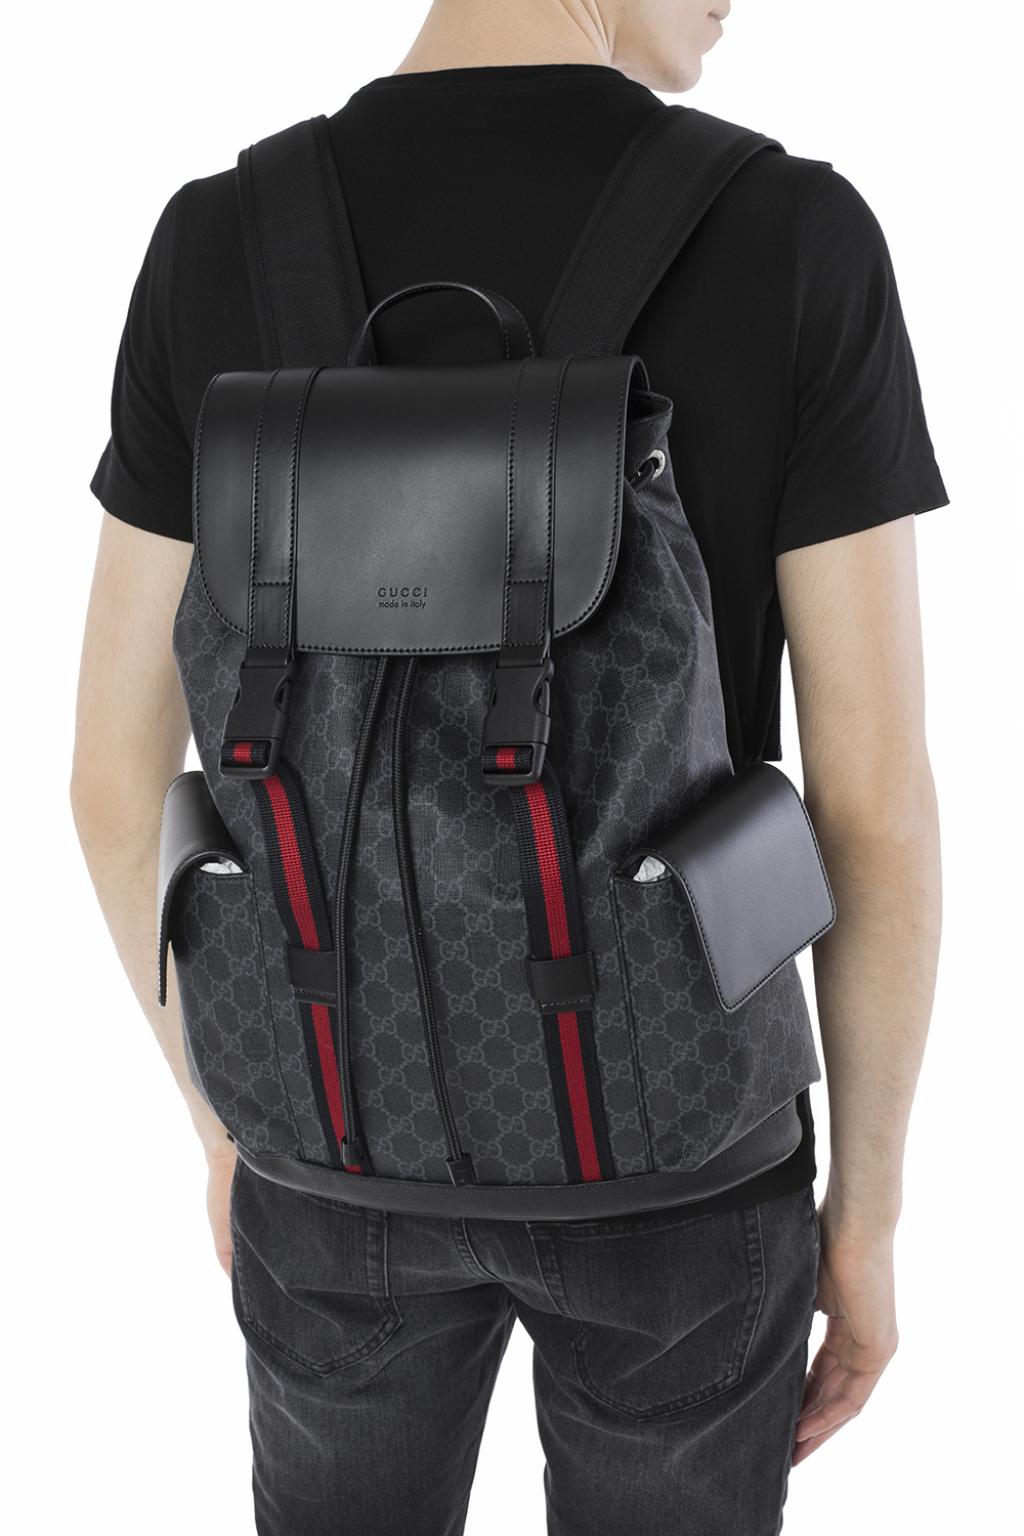 GG Supreme' canvas backpack Gucci 